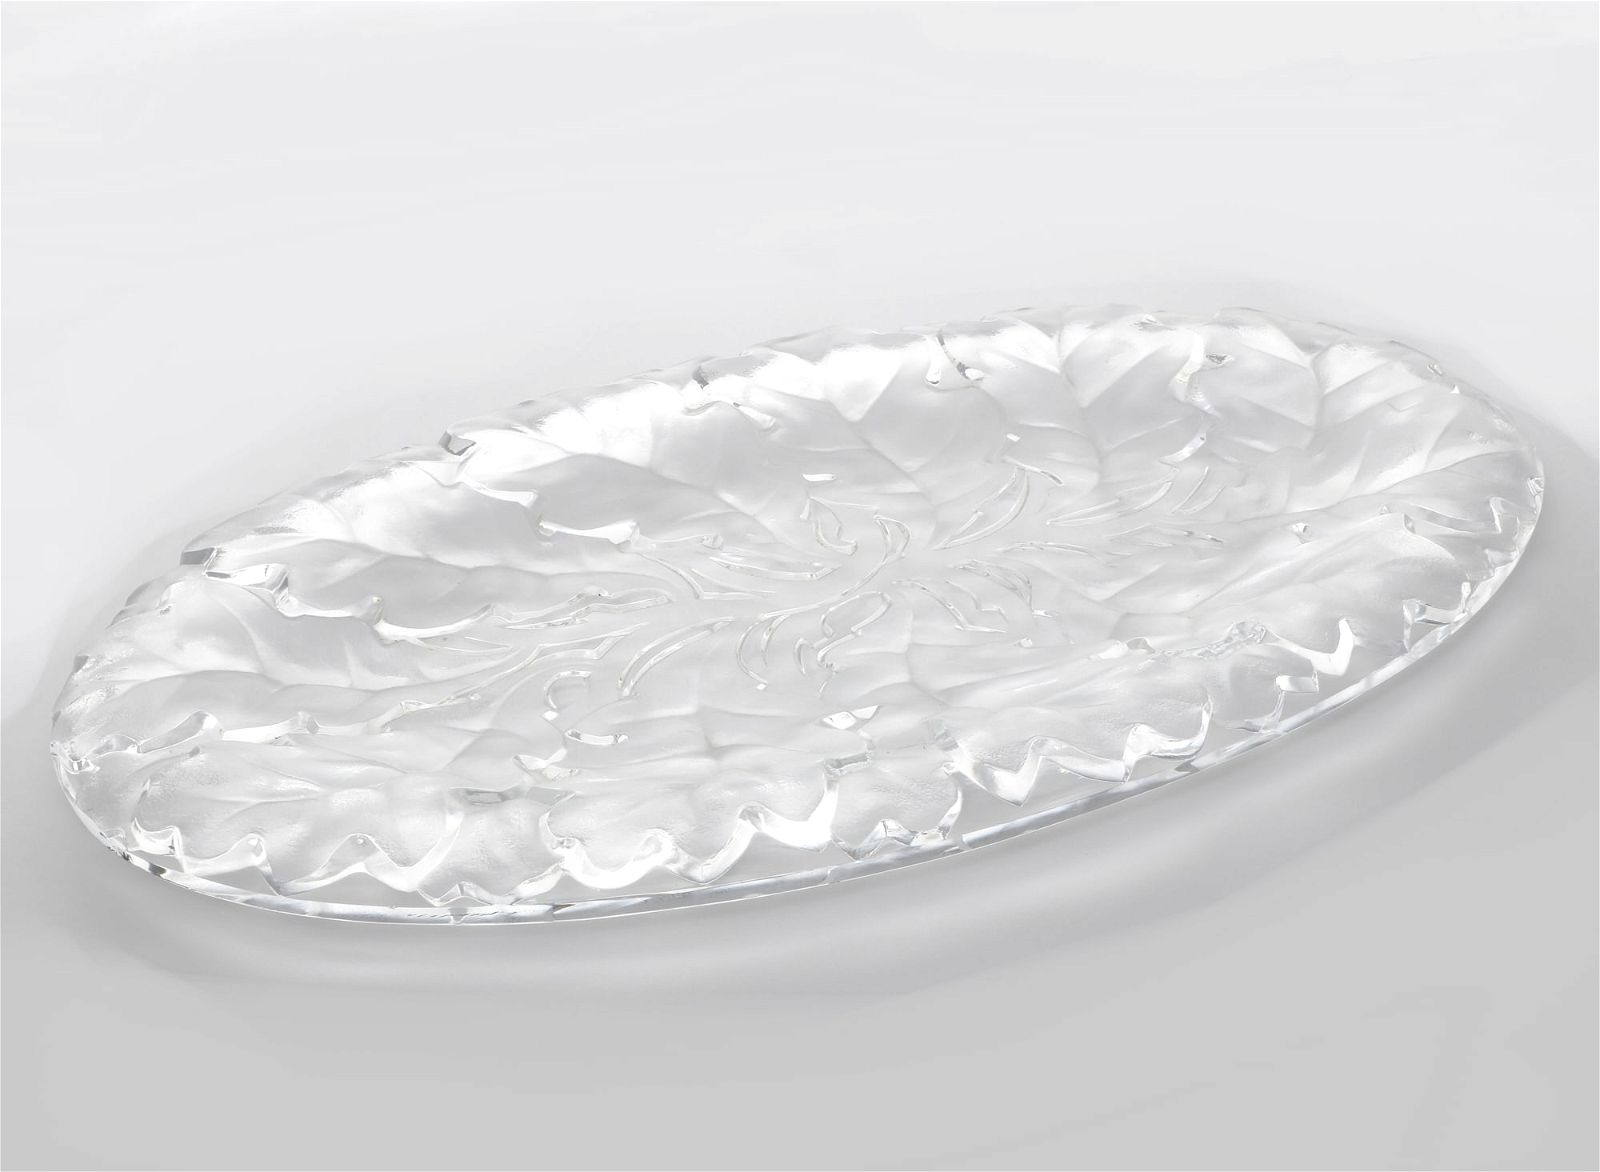 A LALIQUE CLEAR AND FROSTED GLASS 2fb426c